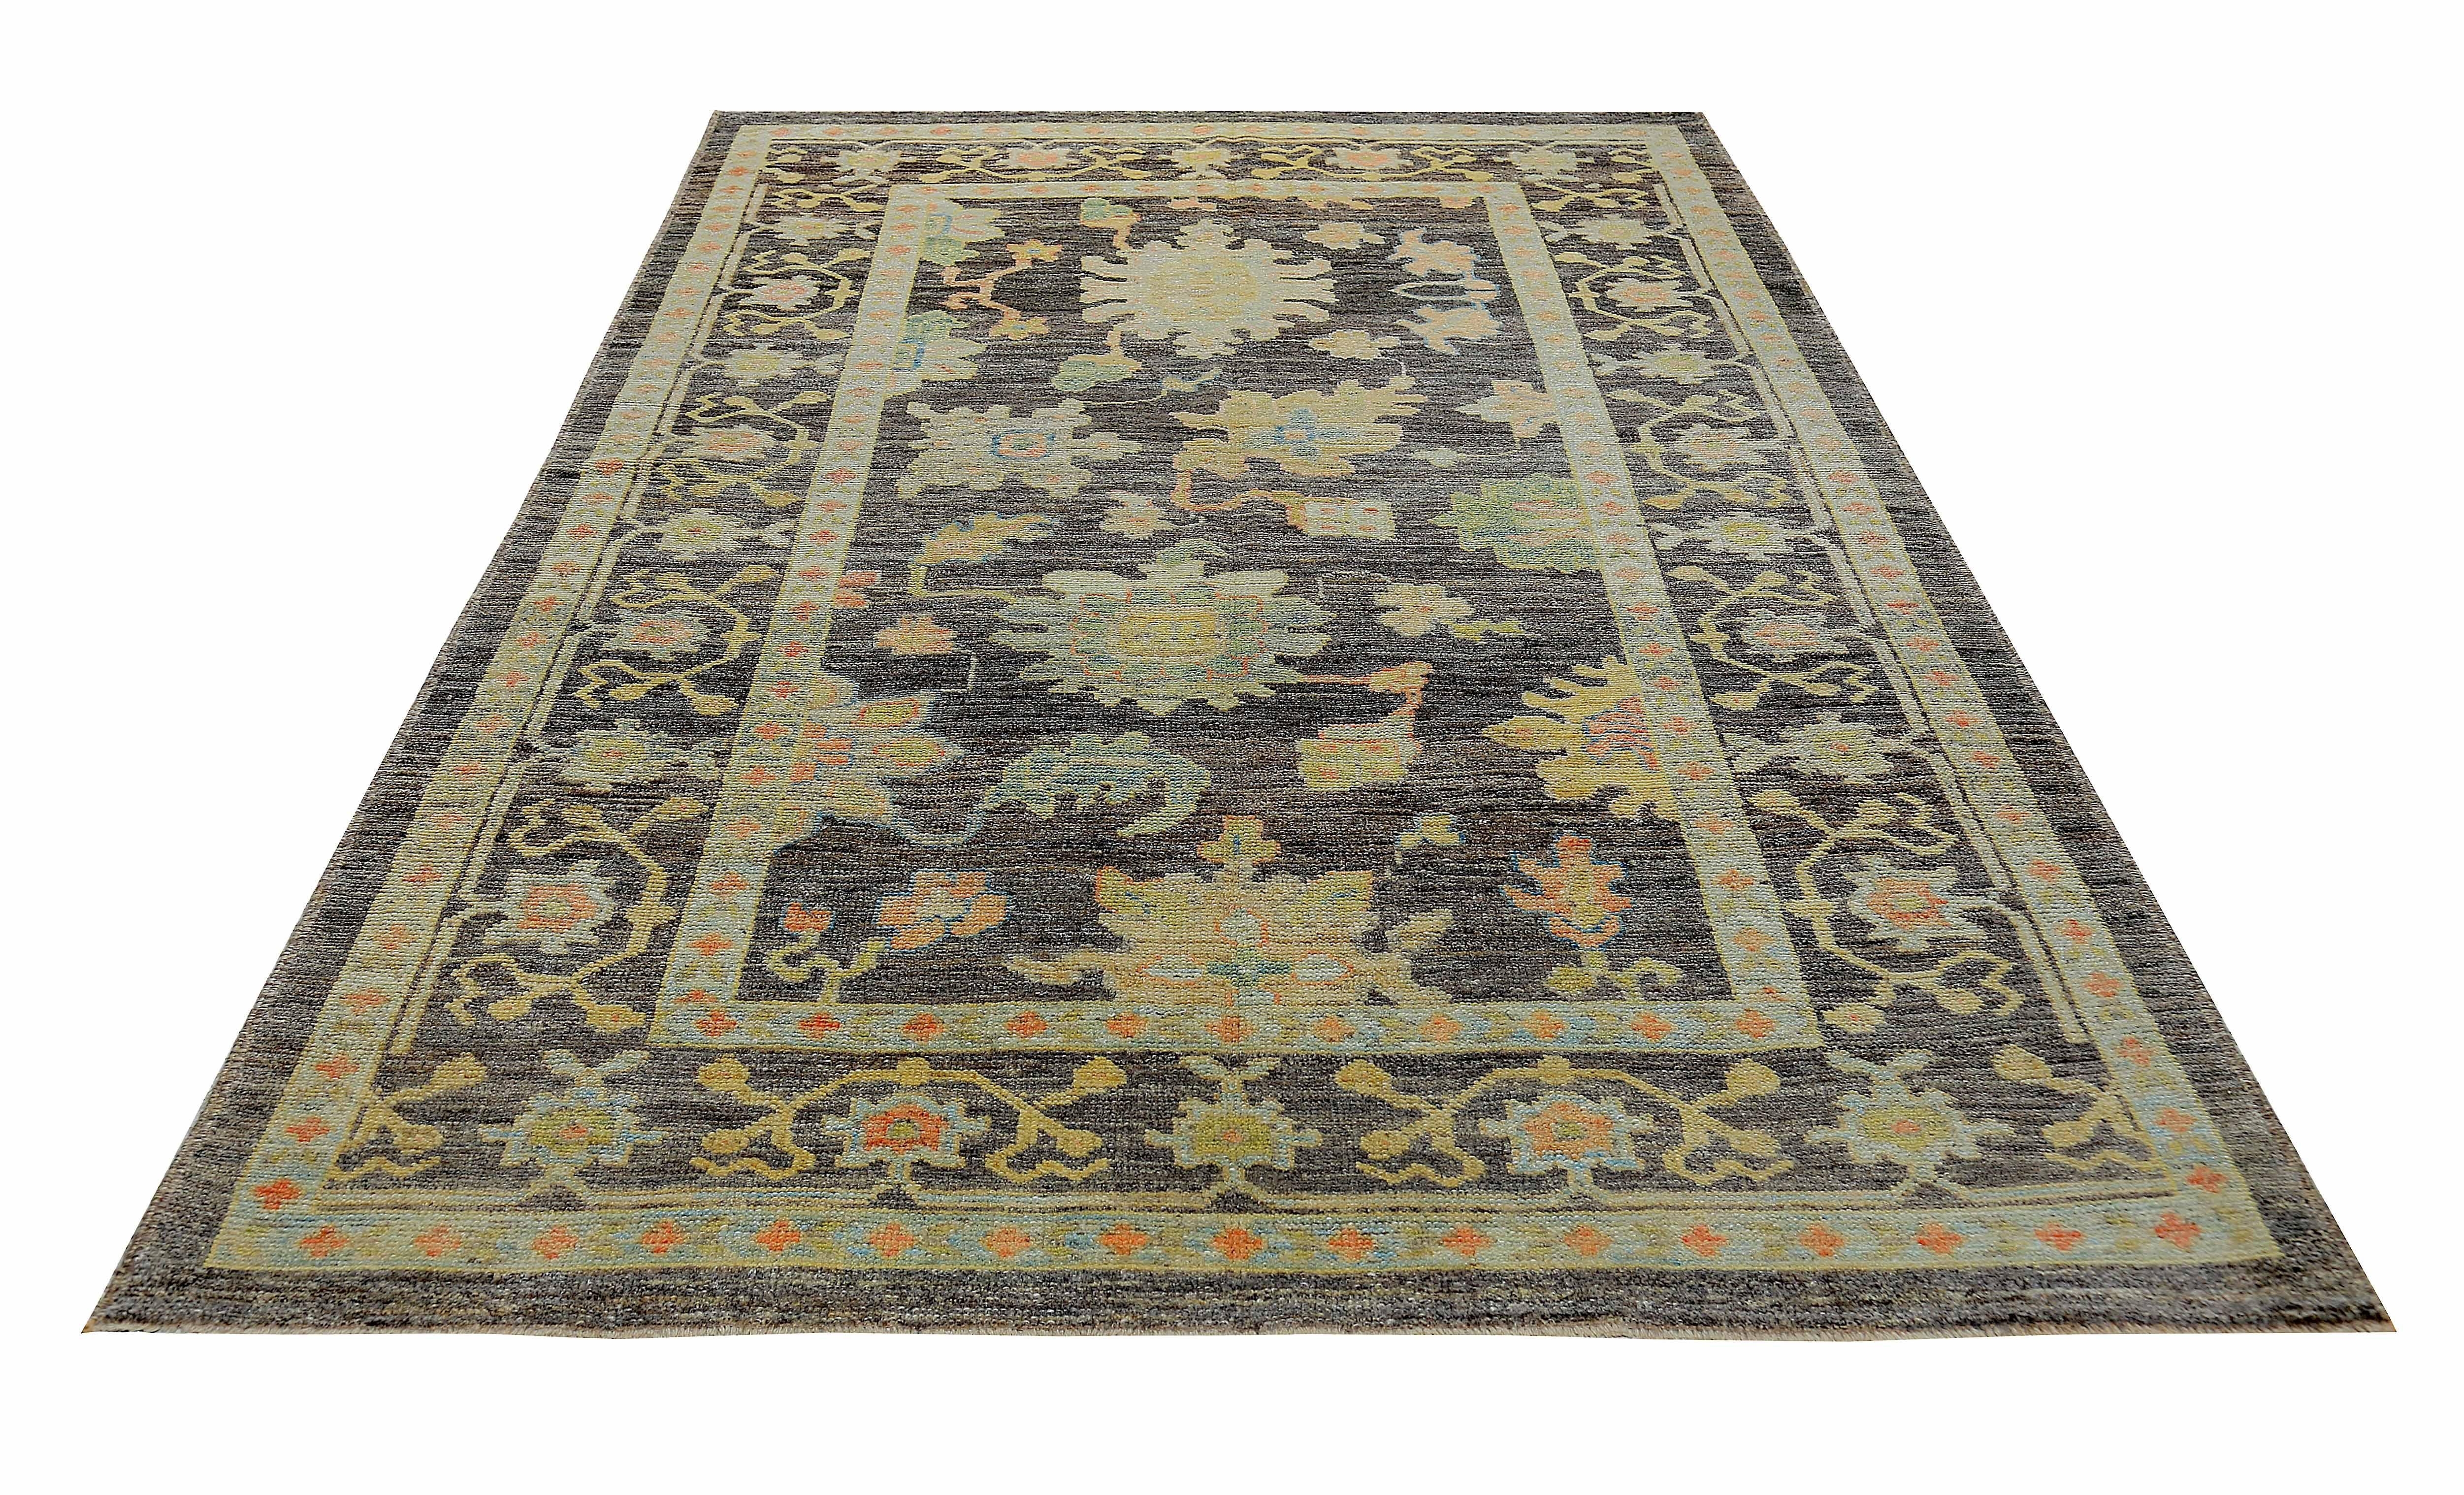 New Turkish rug made of handwoven sheep’s wool of the finest quality. It’s colored with organic vegetable dyes that are certified safe for humans and pets alike. It features pink and gold floral details on a beautiful brown field. Flower patterns